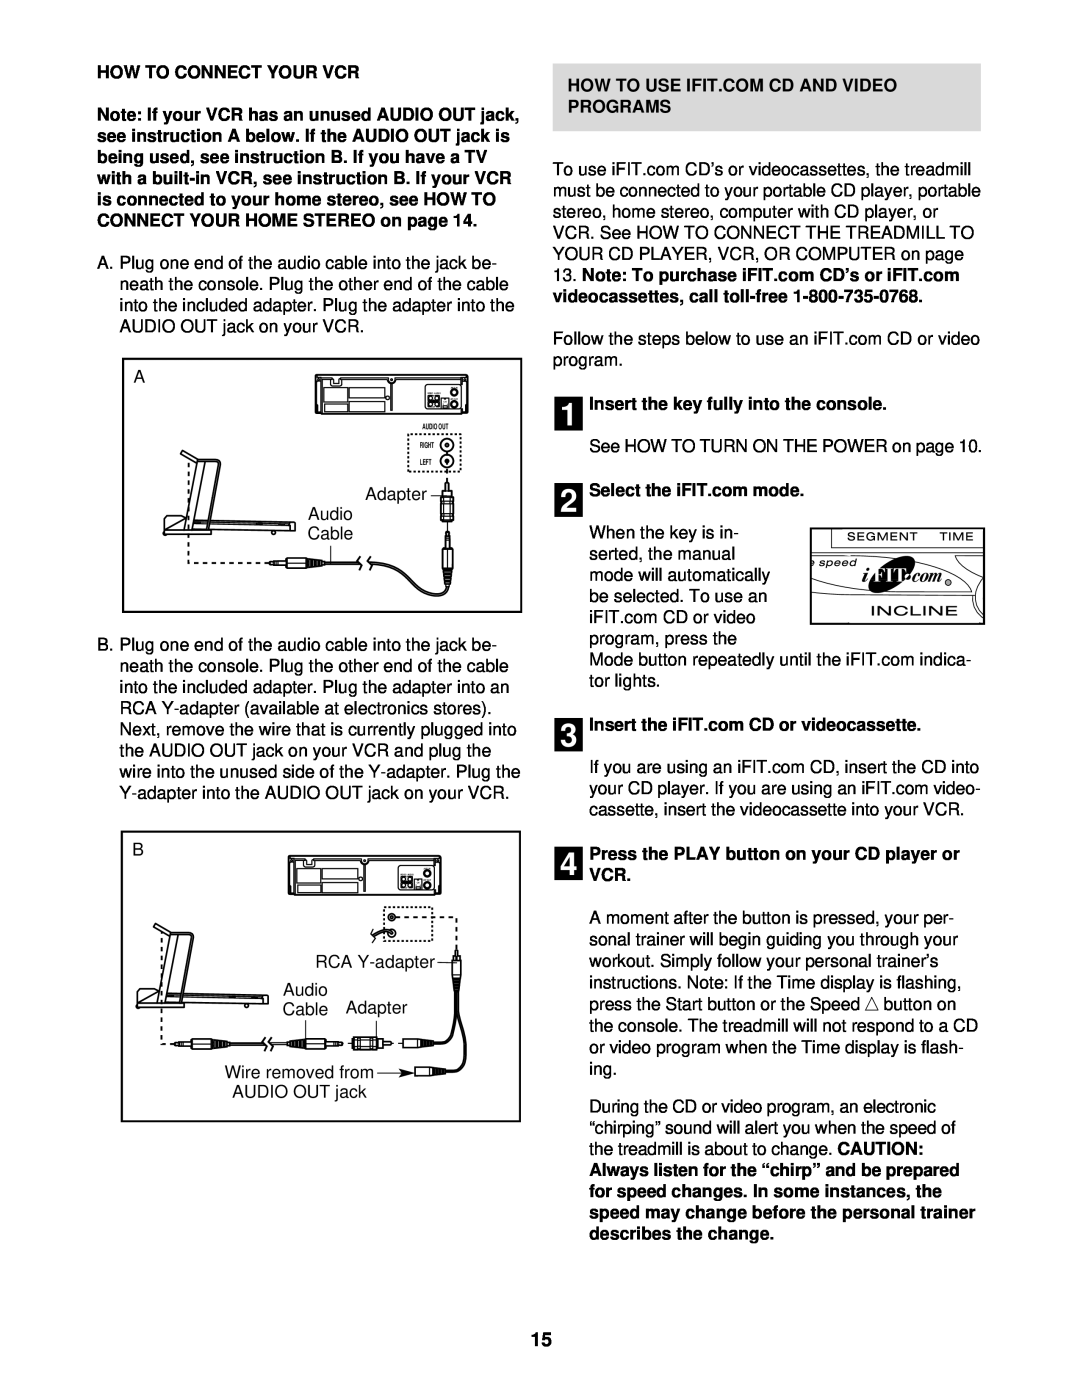 ProForm 831.293040 How To Connect Your Vcr, Adapter, Audio, Cable, RCA Y-adapter, Wire removed from, AUDIO OUT jack 